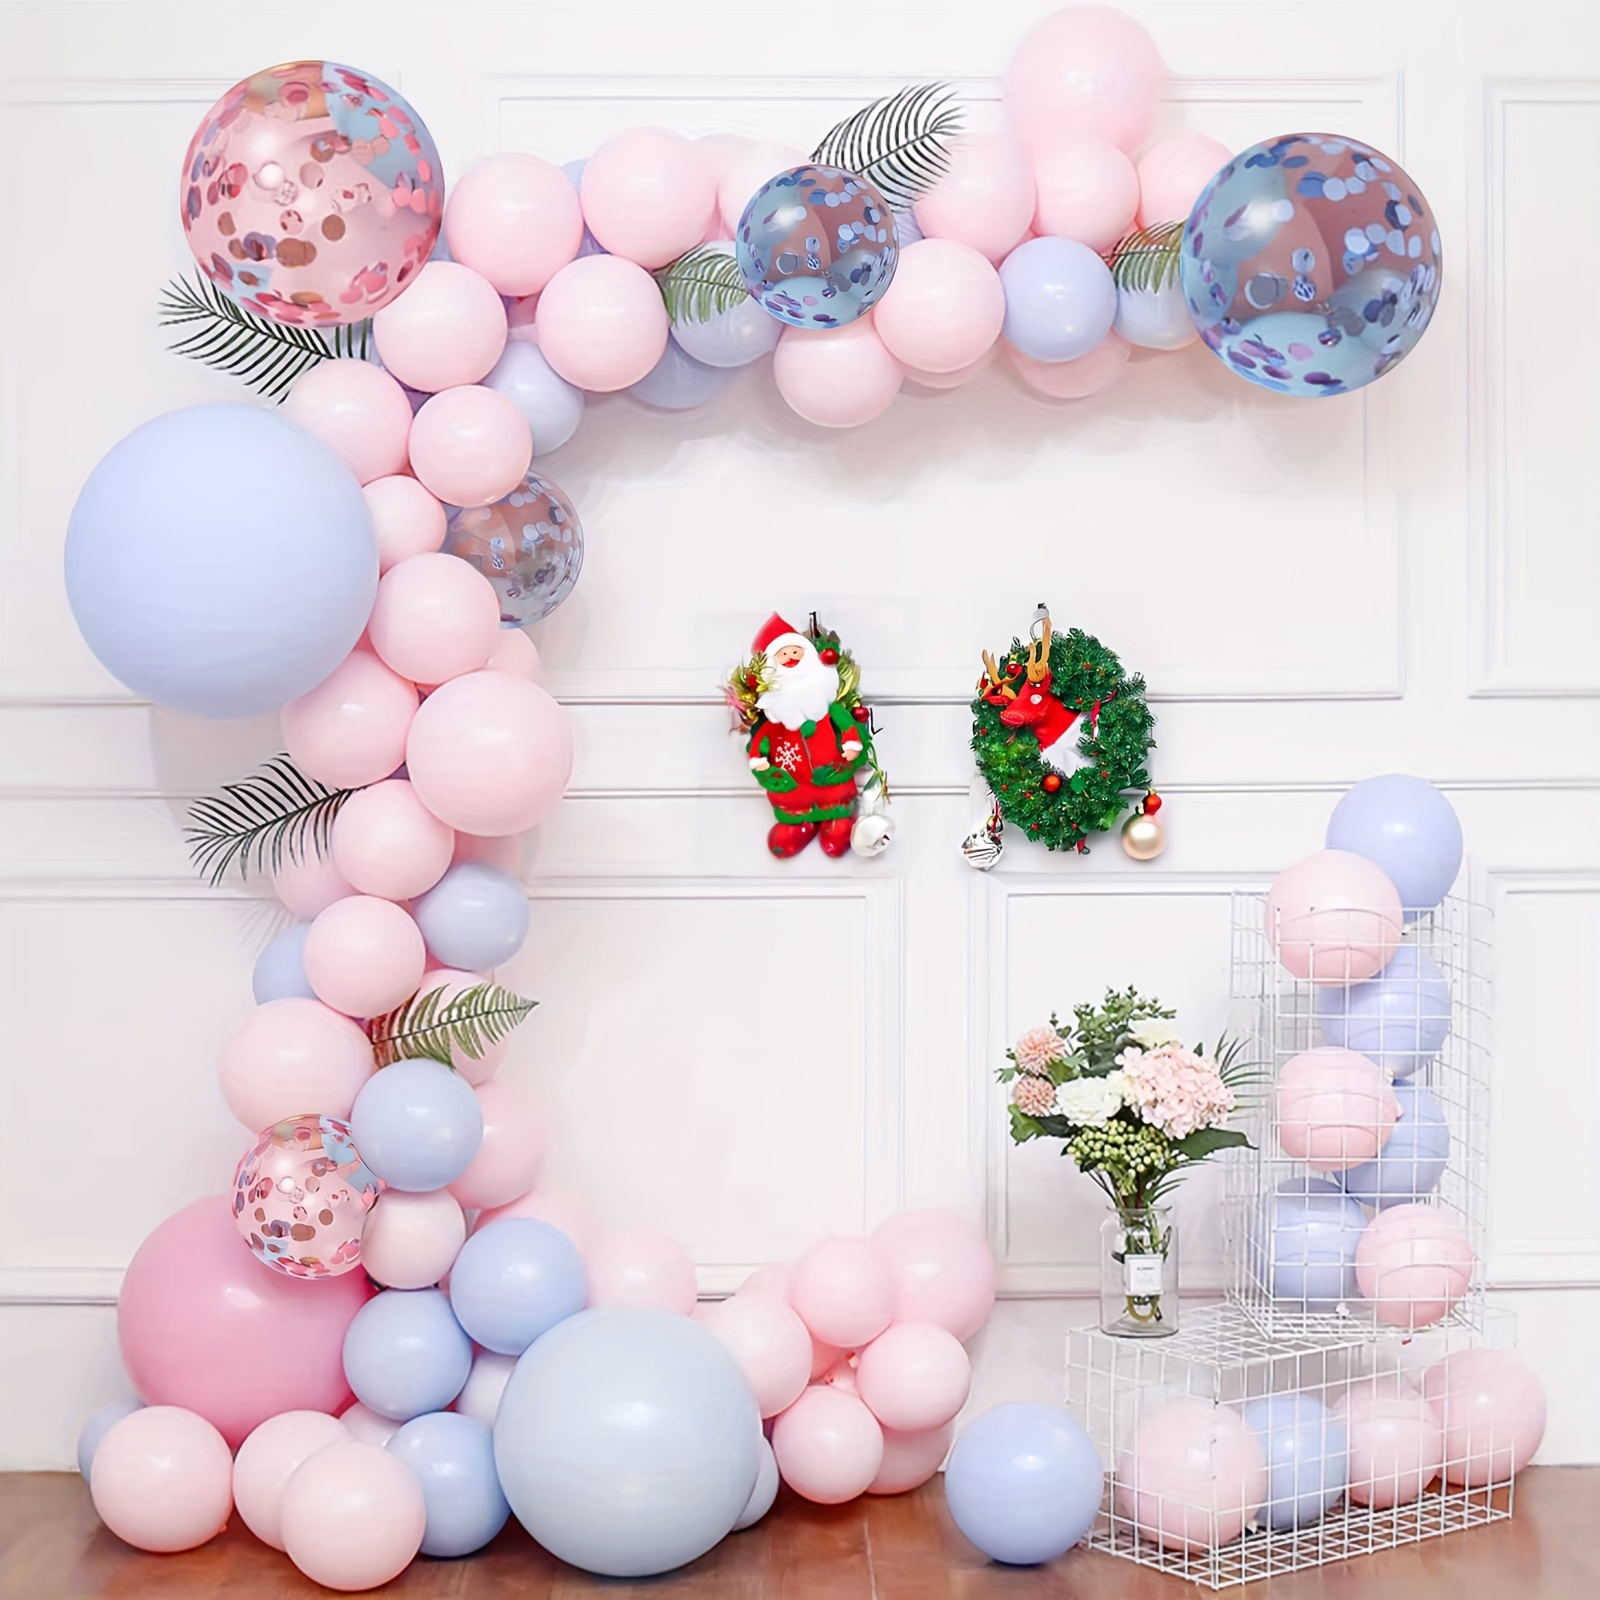 Coffee Pastel Blue PInk Gender Reveal Balloon Garland Kit Baby Shower Oh Baby  Party Decorations Supplies